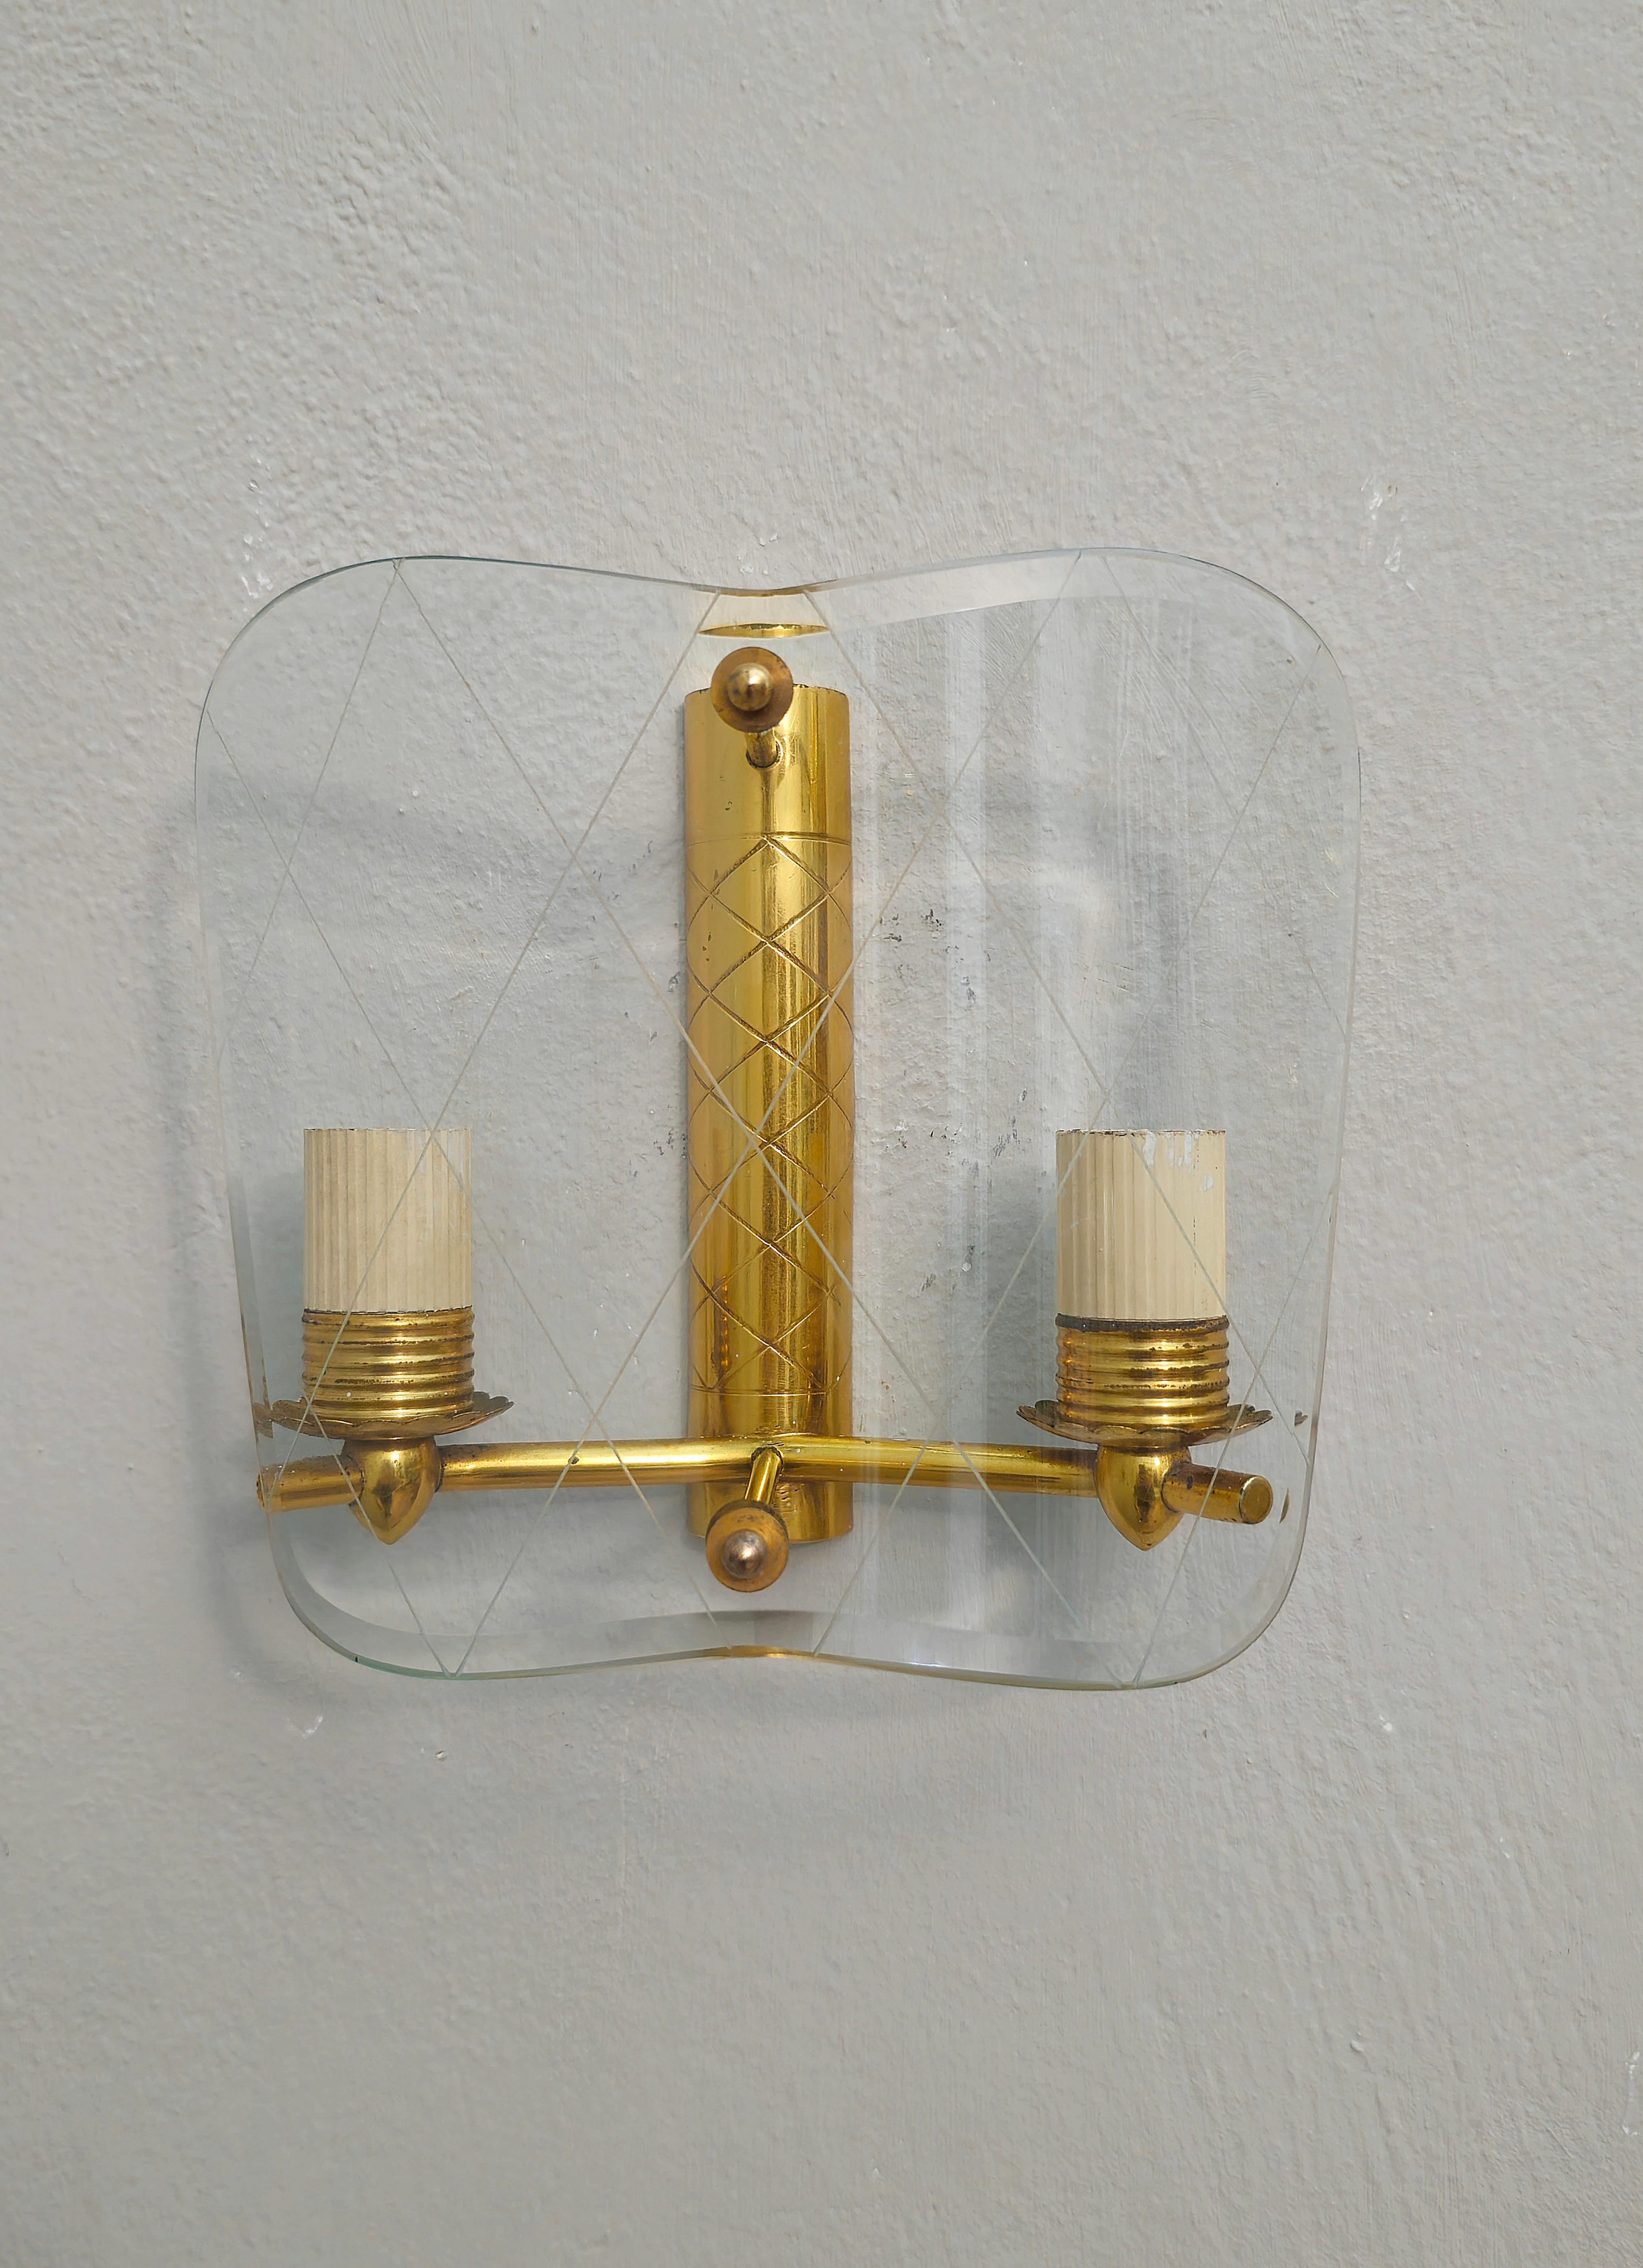 3 Wall Lights Sconces Brass Decorated Glass Midcentury Italian Design 1950 For Sale 2